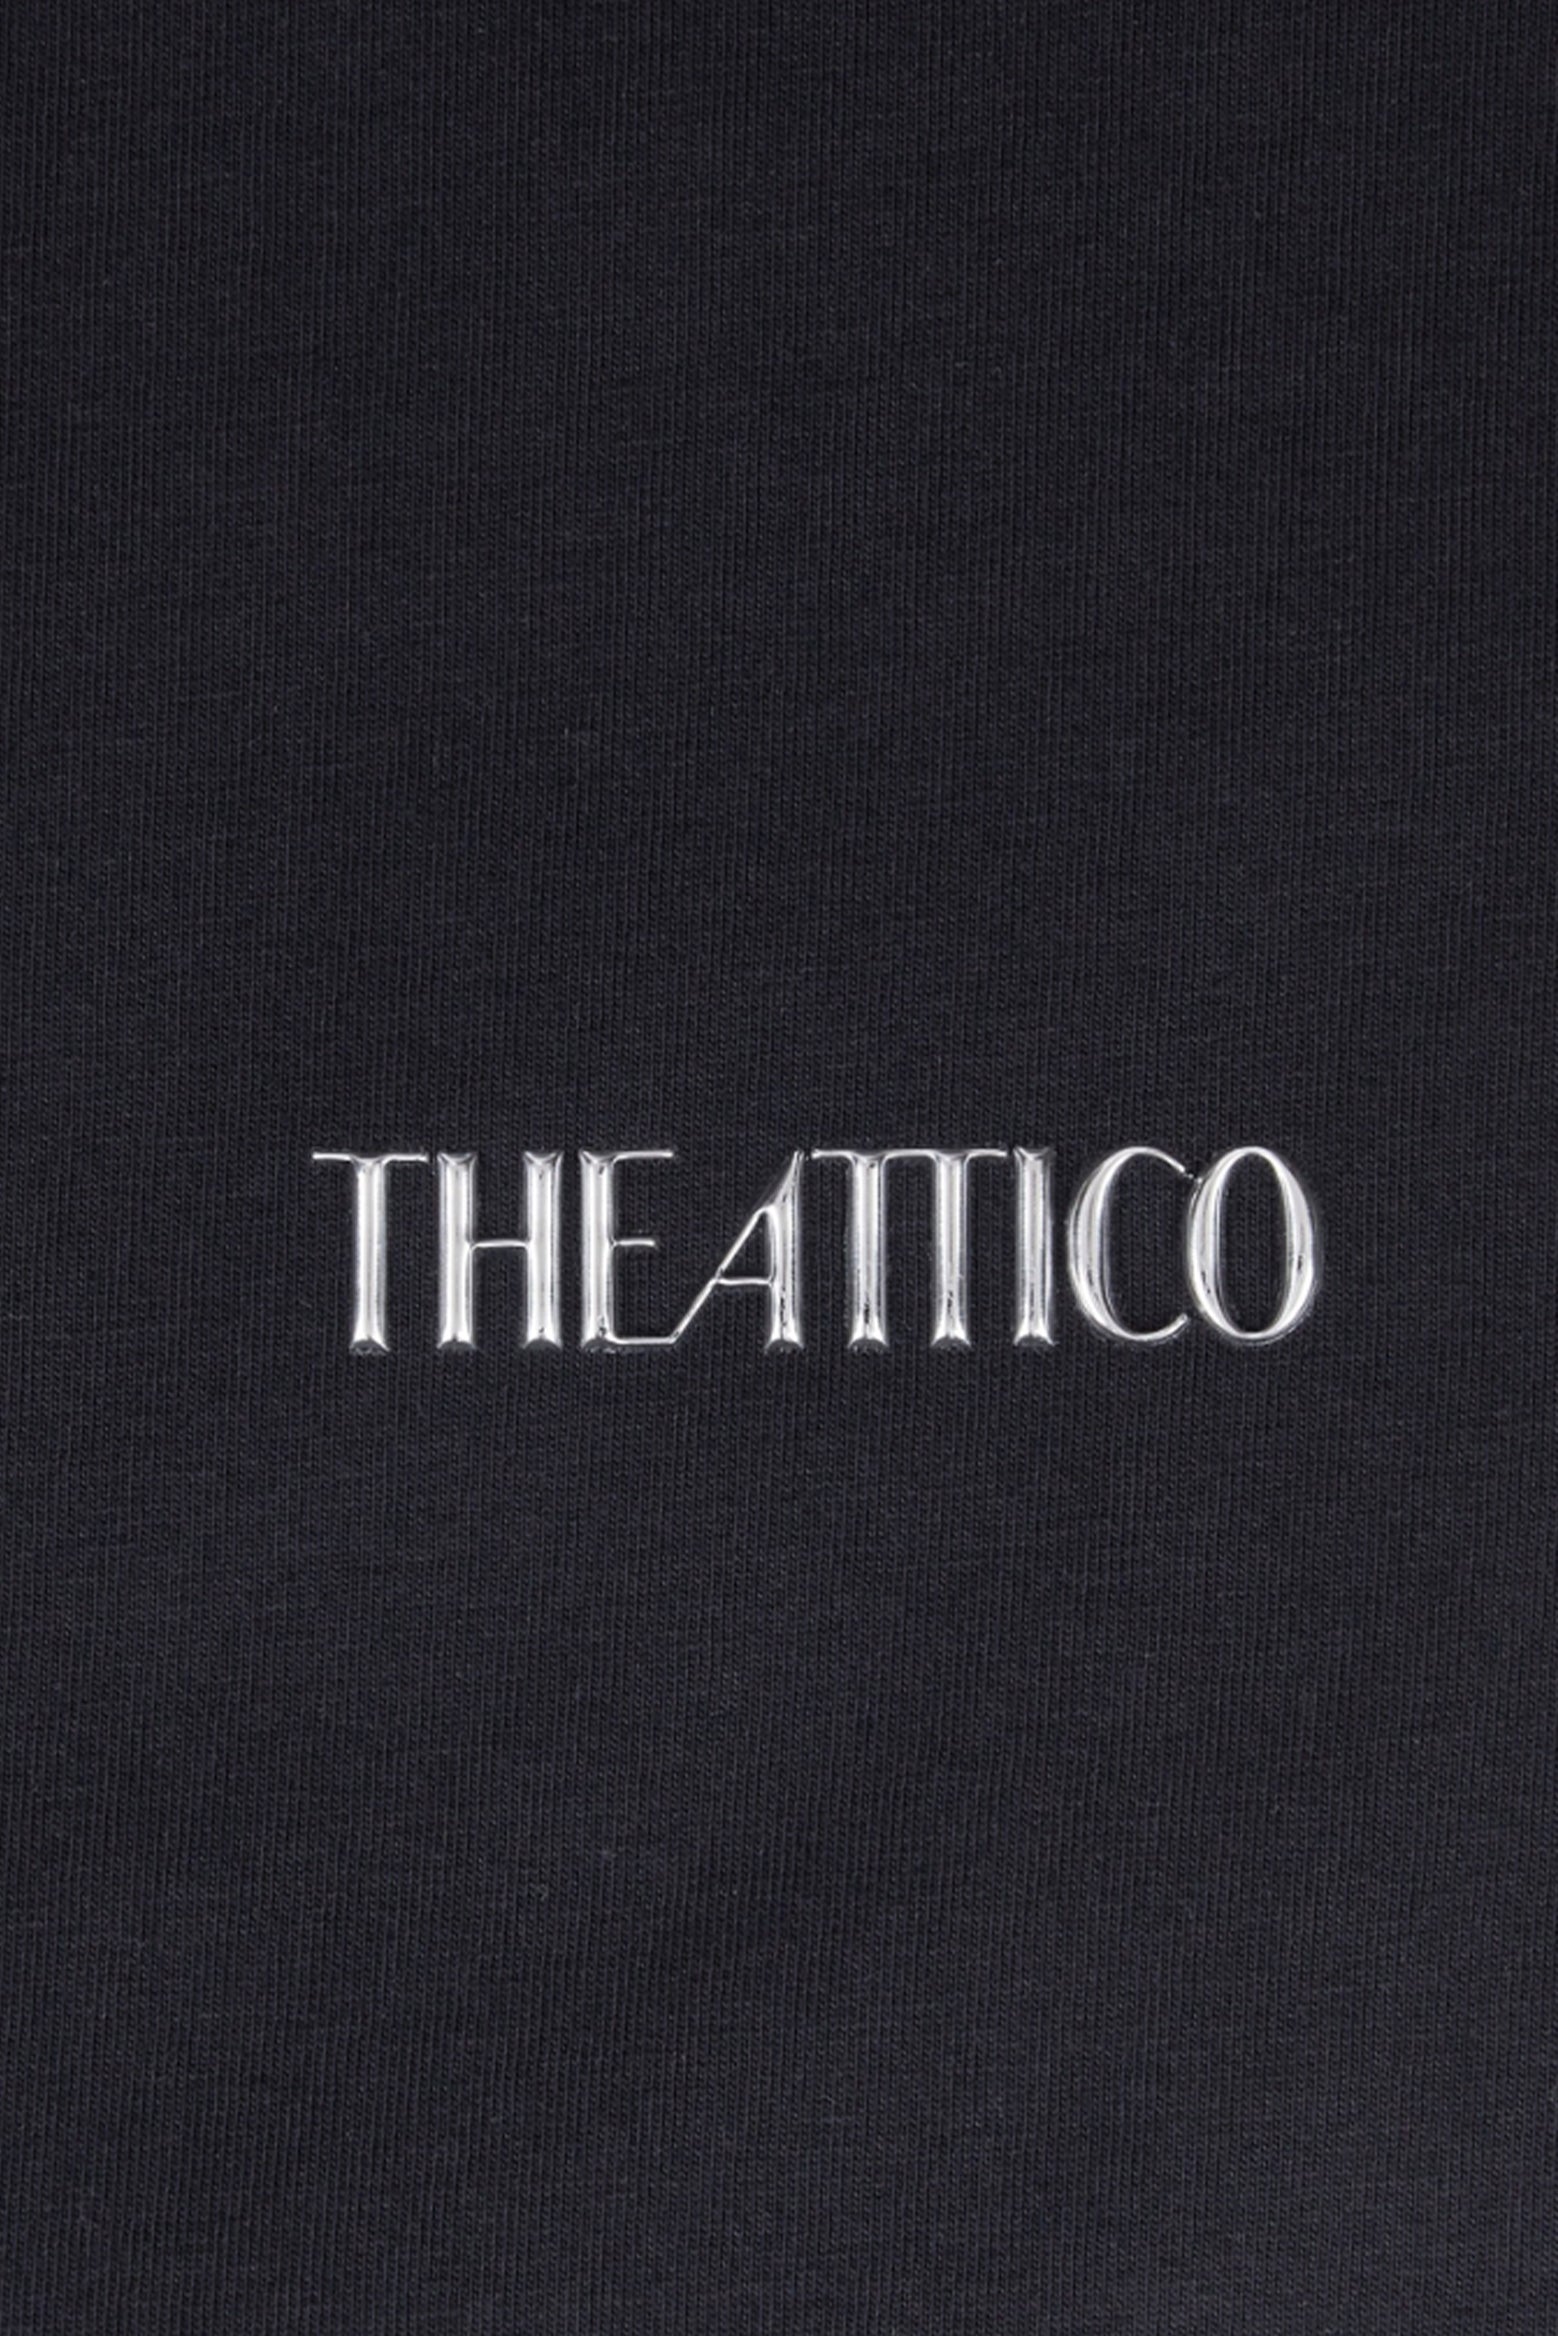 The Attico Kilie T Shirt in Black available from The New Trend Australia